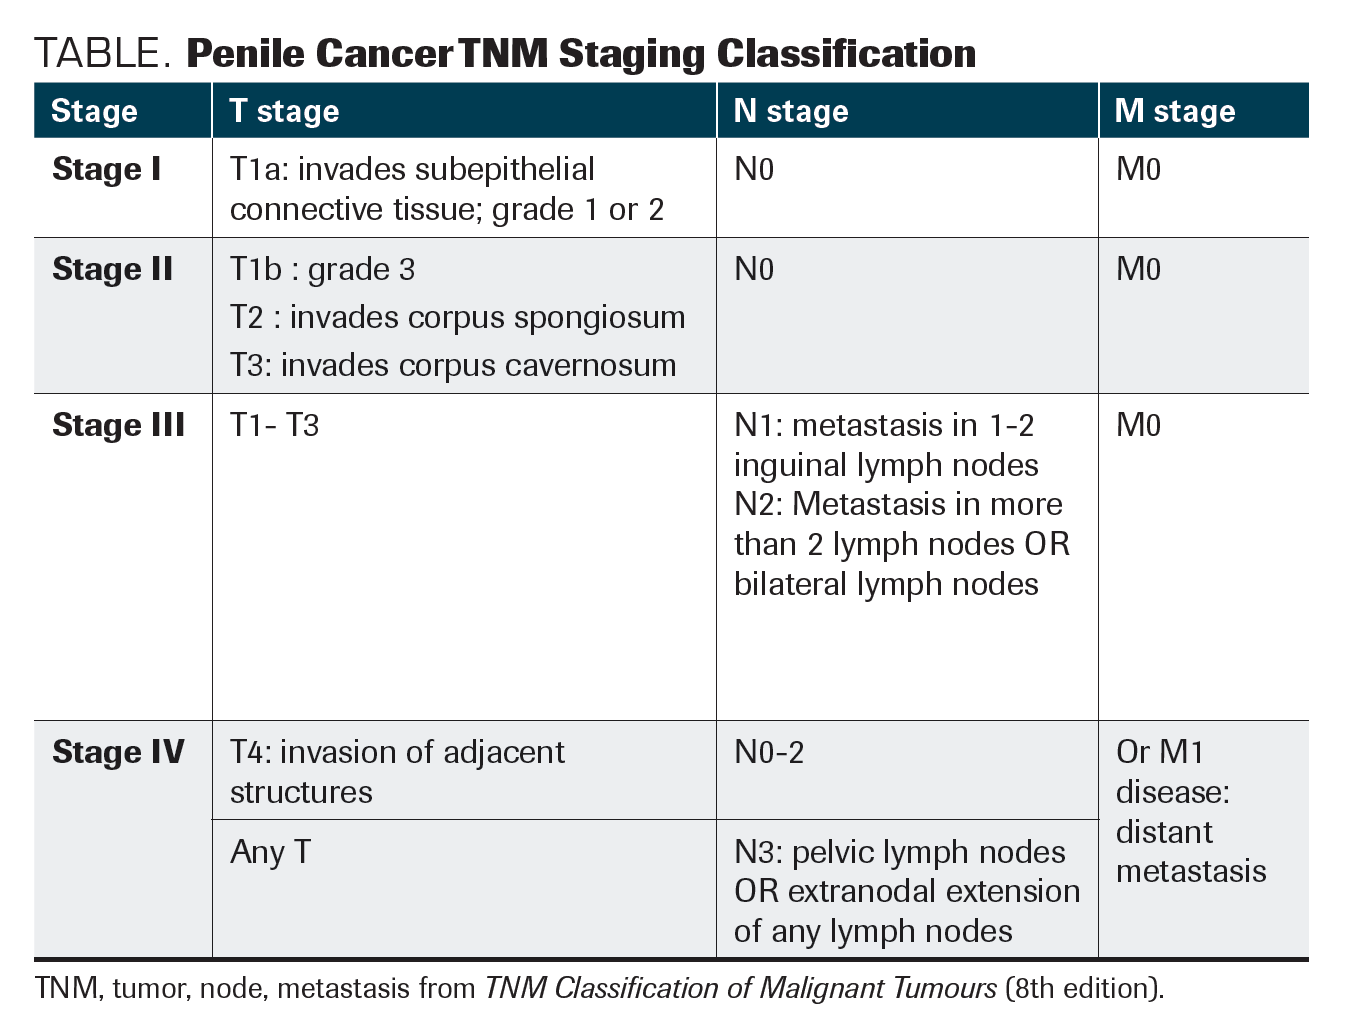 TABLE. Penile Cancer TNM Staging Classification